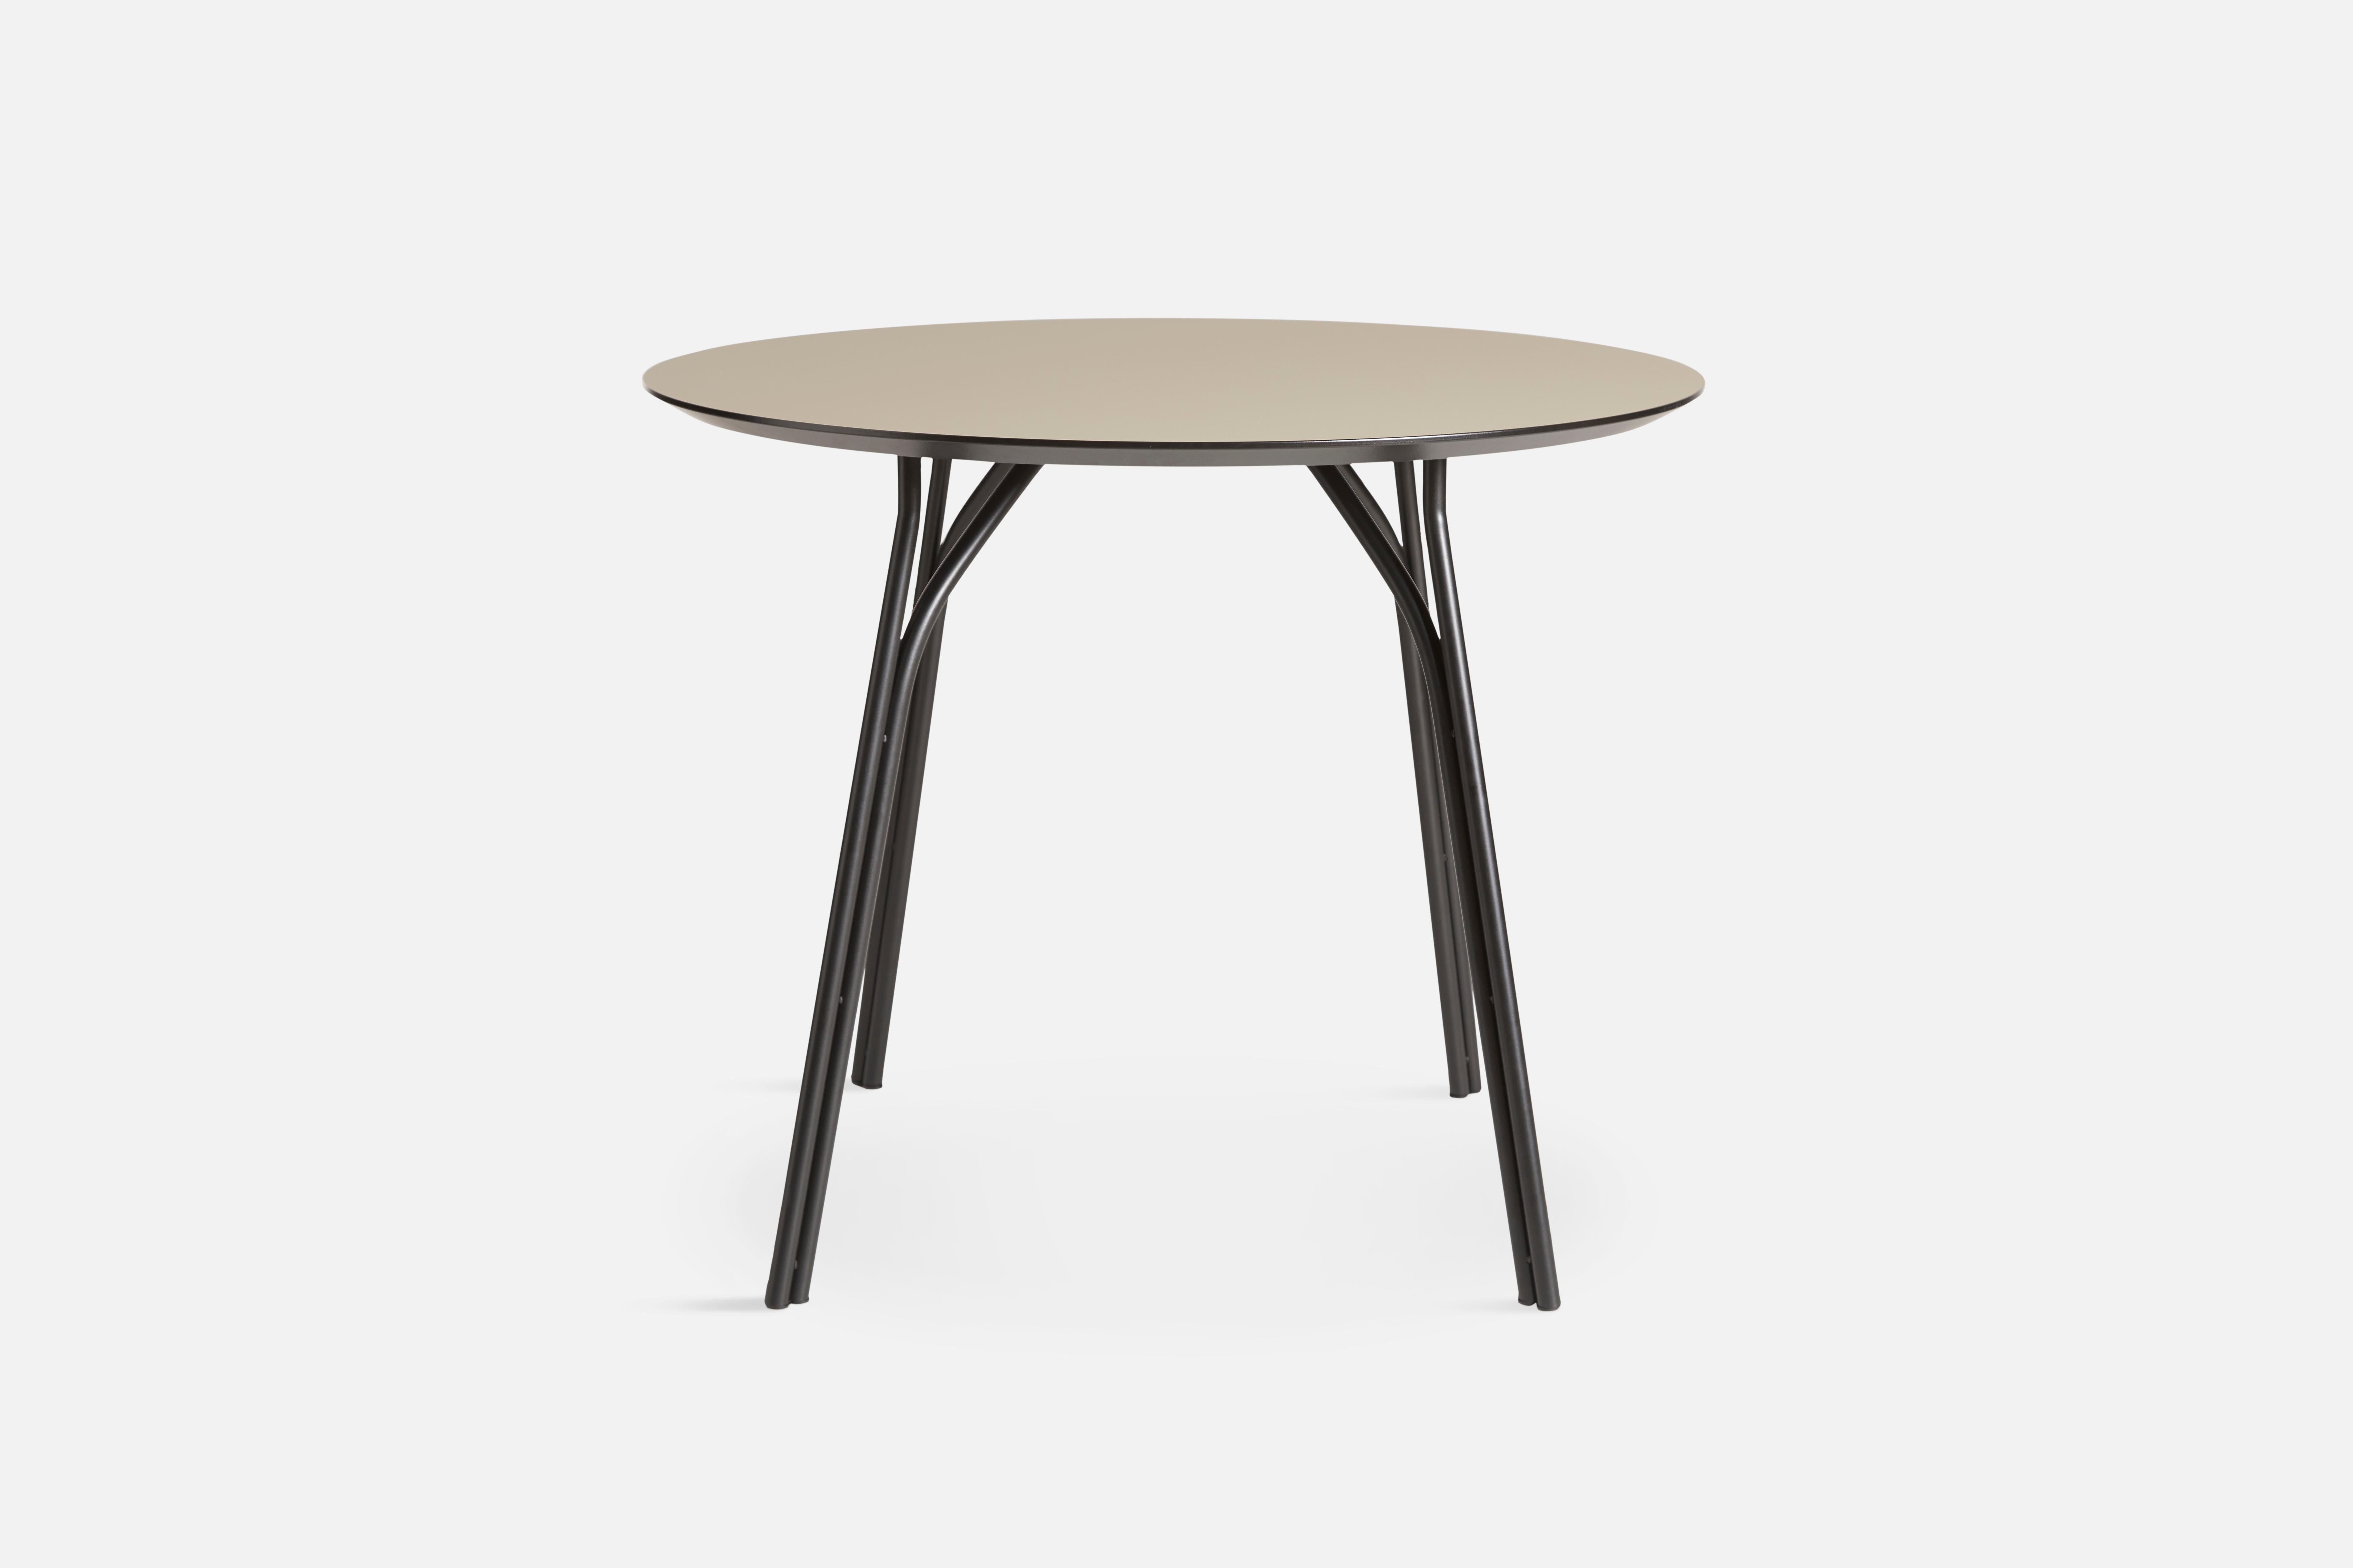 Tree small beige black dining table by Elisabeth Hertzfeld
Materials: Fenix Laminate, metal 
Dimensions: D 90 x W 90 x H 74 cm

The founders, Mia and Torben Koed, decided to put their 30 years of experience into a new project. It was time for a